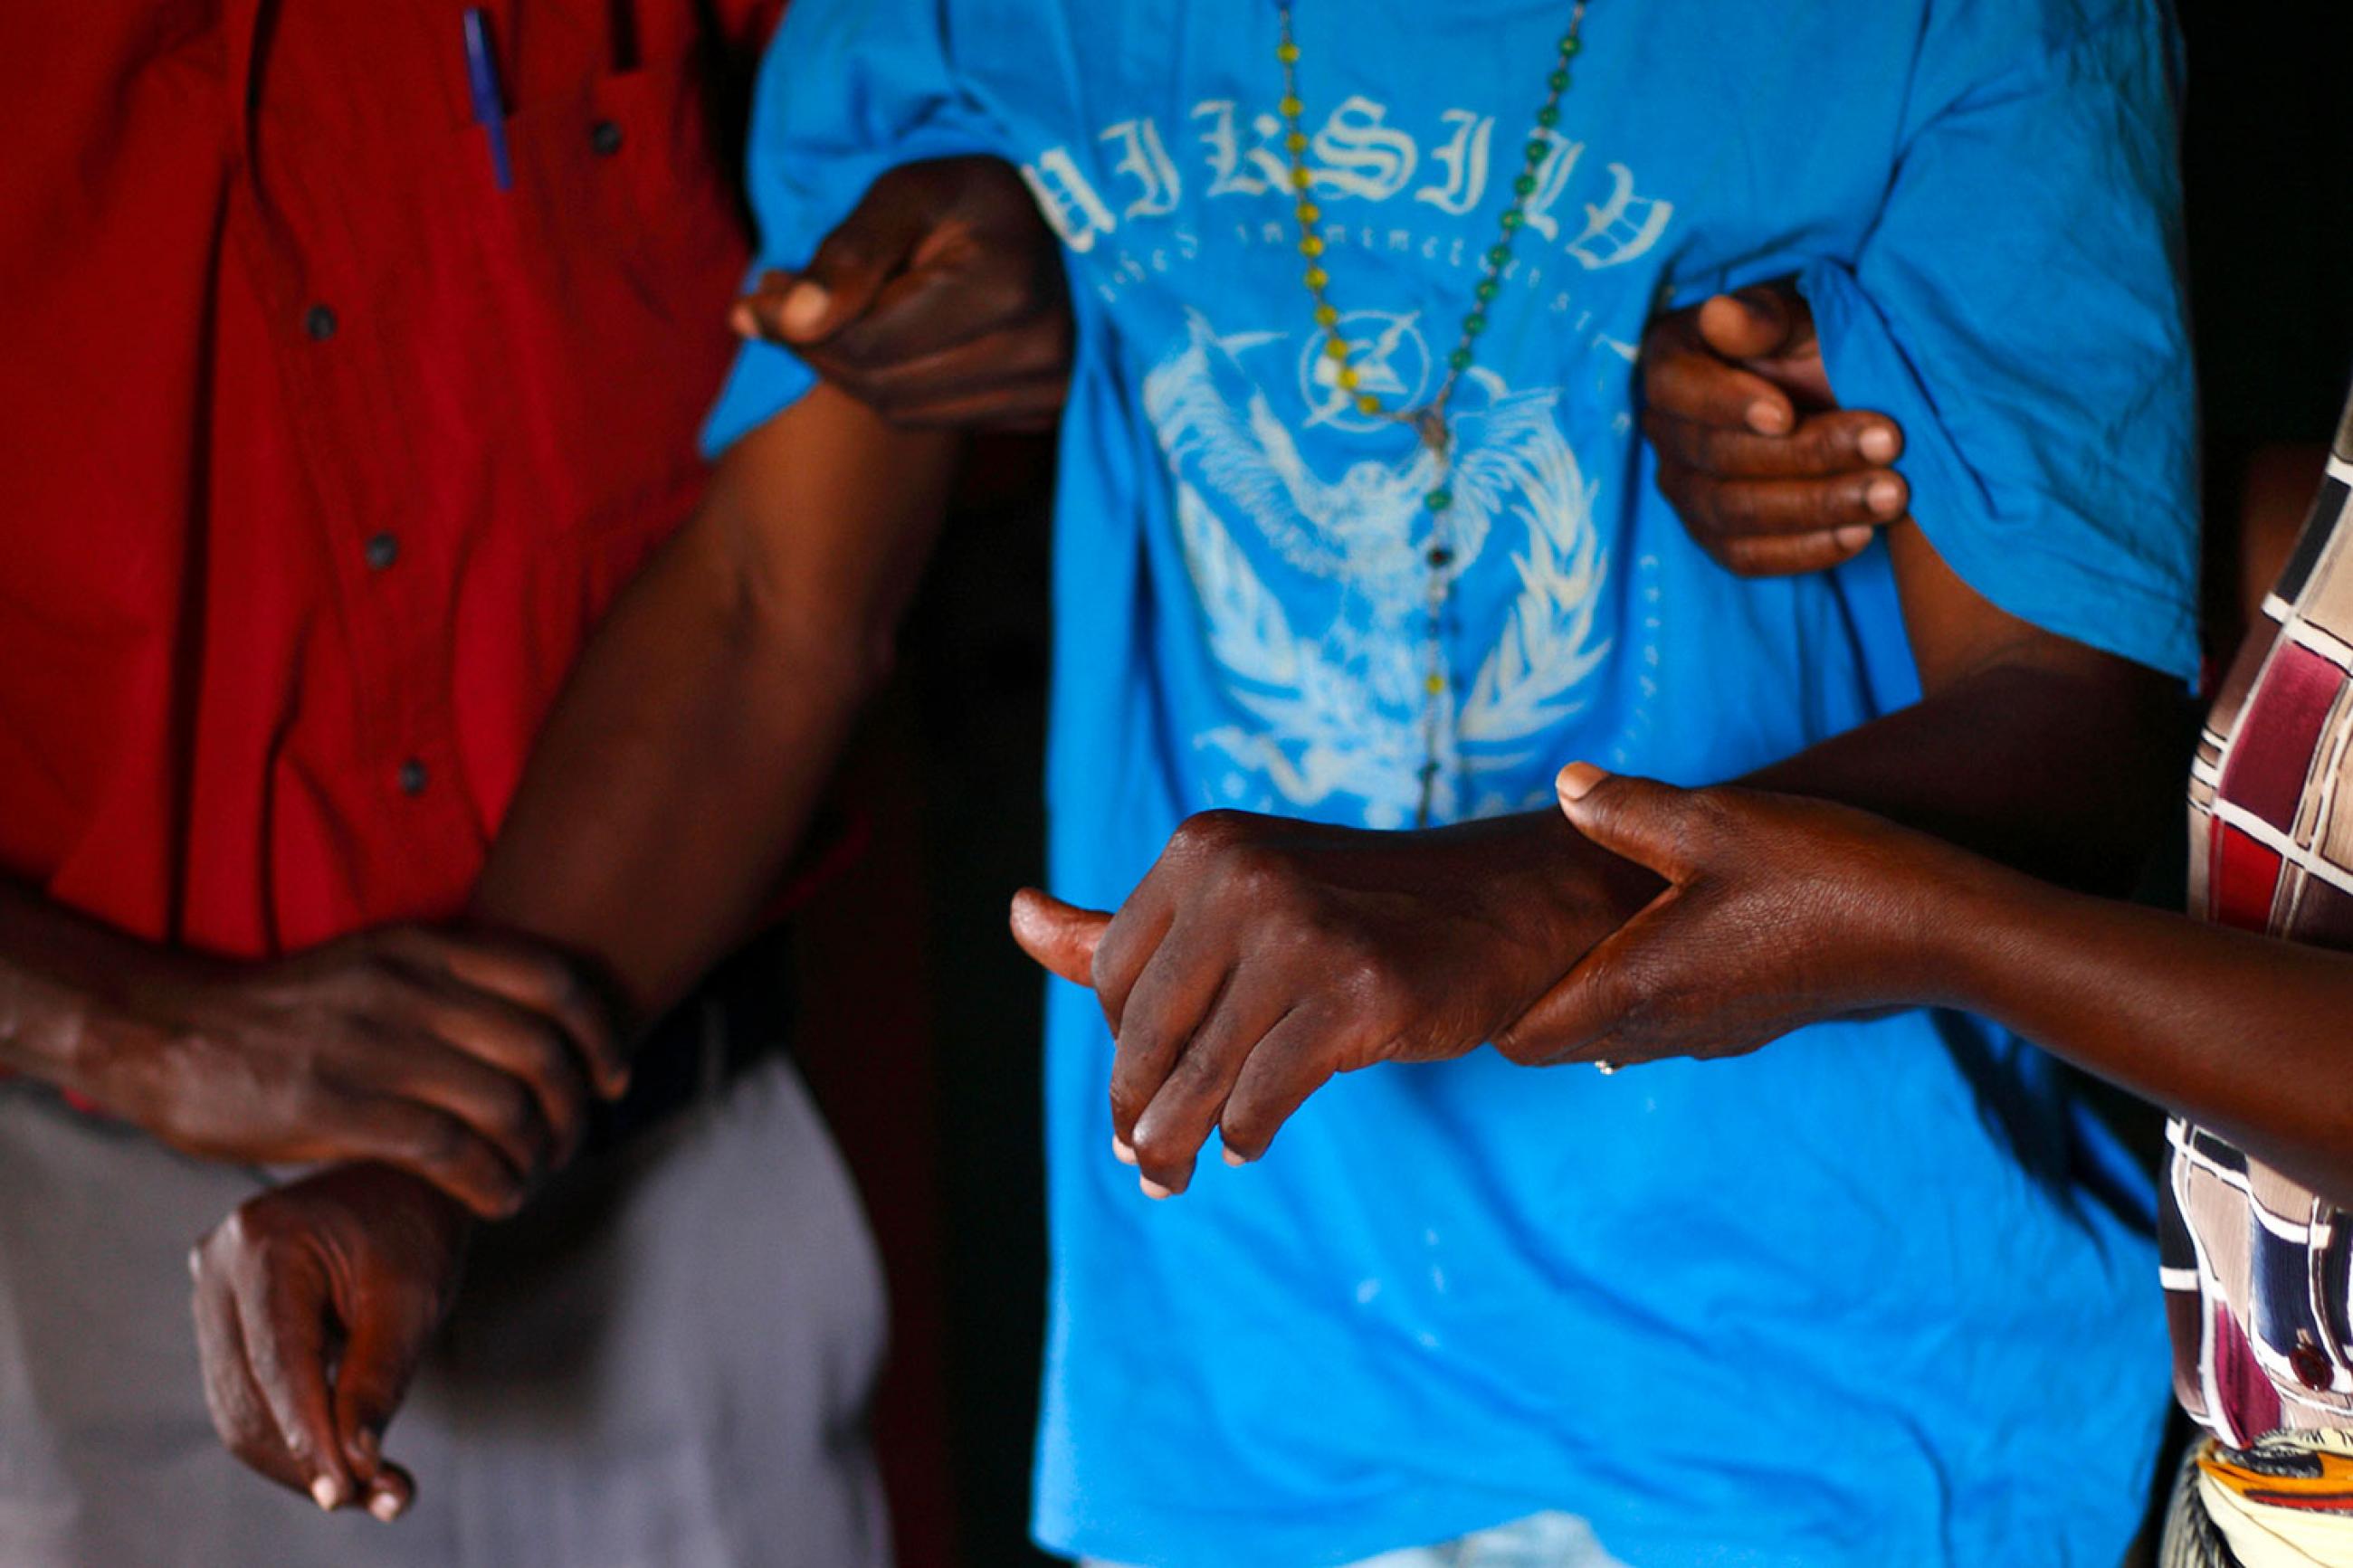 A person with HIV/AIDS is helped to his bedroom by caregivers from a community home-based care team visiting him at his home in Matero township on the outskirts of Lusaka, Zambia on April 17, 2012. The picture shows the torso of a man wearing a loose-fitting light blue shirt being helped by two other people. REUTERS/Darrin Zammit Lupi 